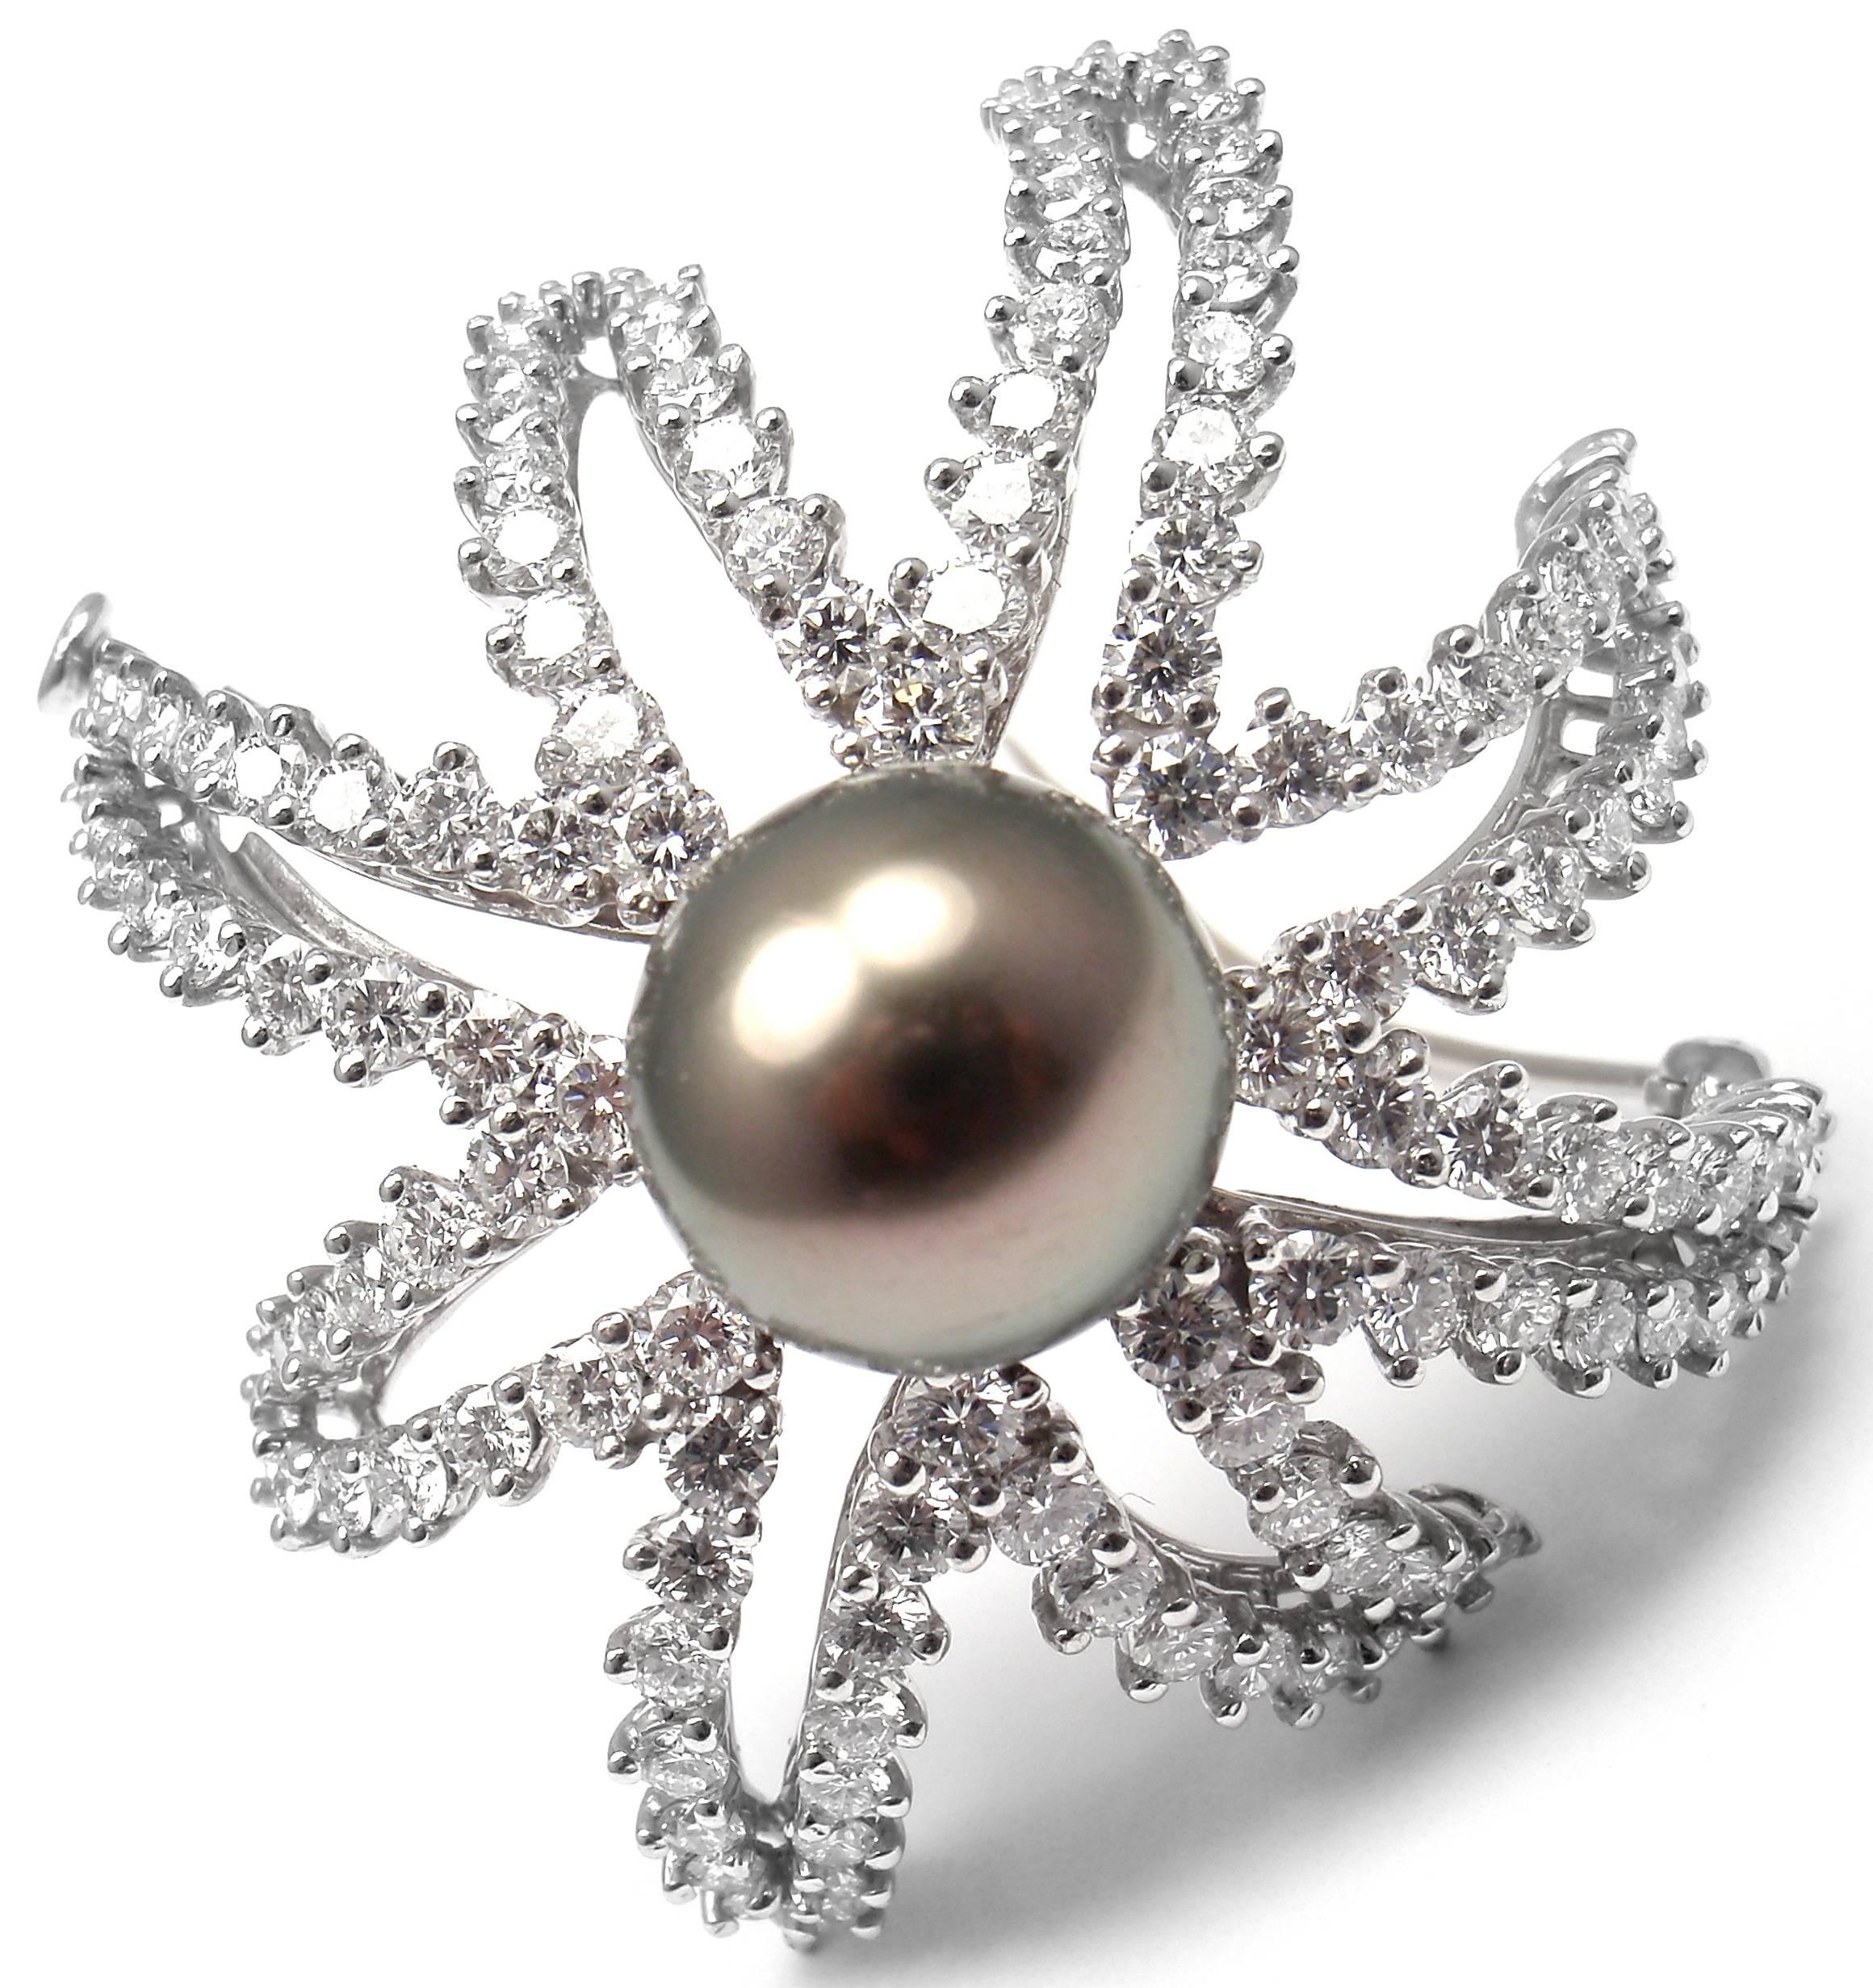 Platinum Diamond and Tahitian Pearl Fireworks Brooch Pin by Tiffany & Co.
With Round brilliant cut diamonds VS1 clarity, E color total weight approx. 4ct
1 large grey Tahitian pearl 11mm

Details: 
Measurements: 40mm x 38mm
Weight: 21.9